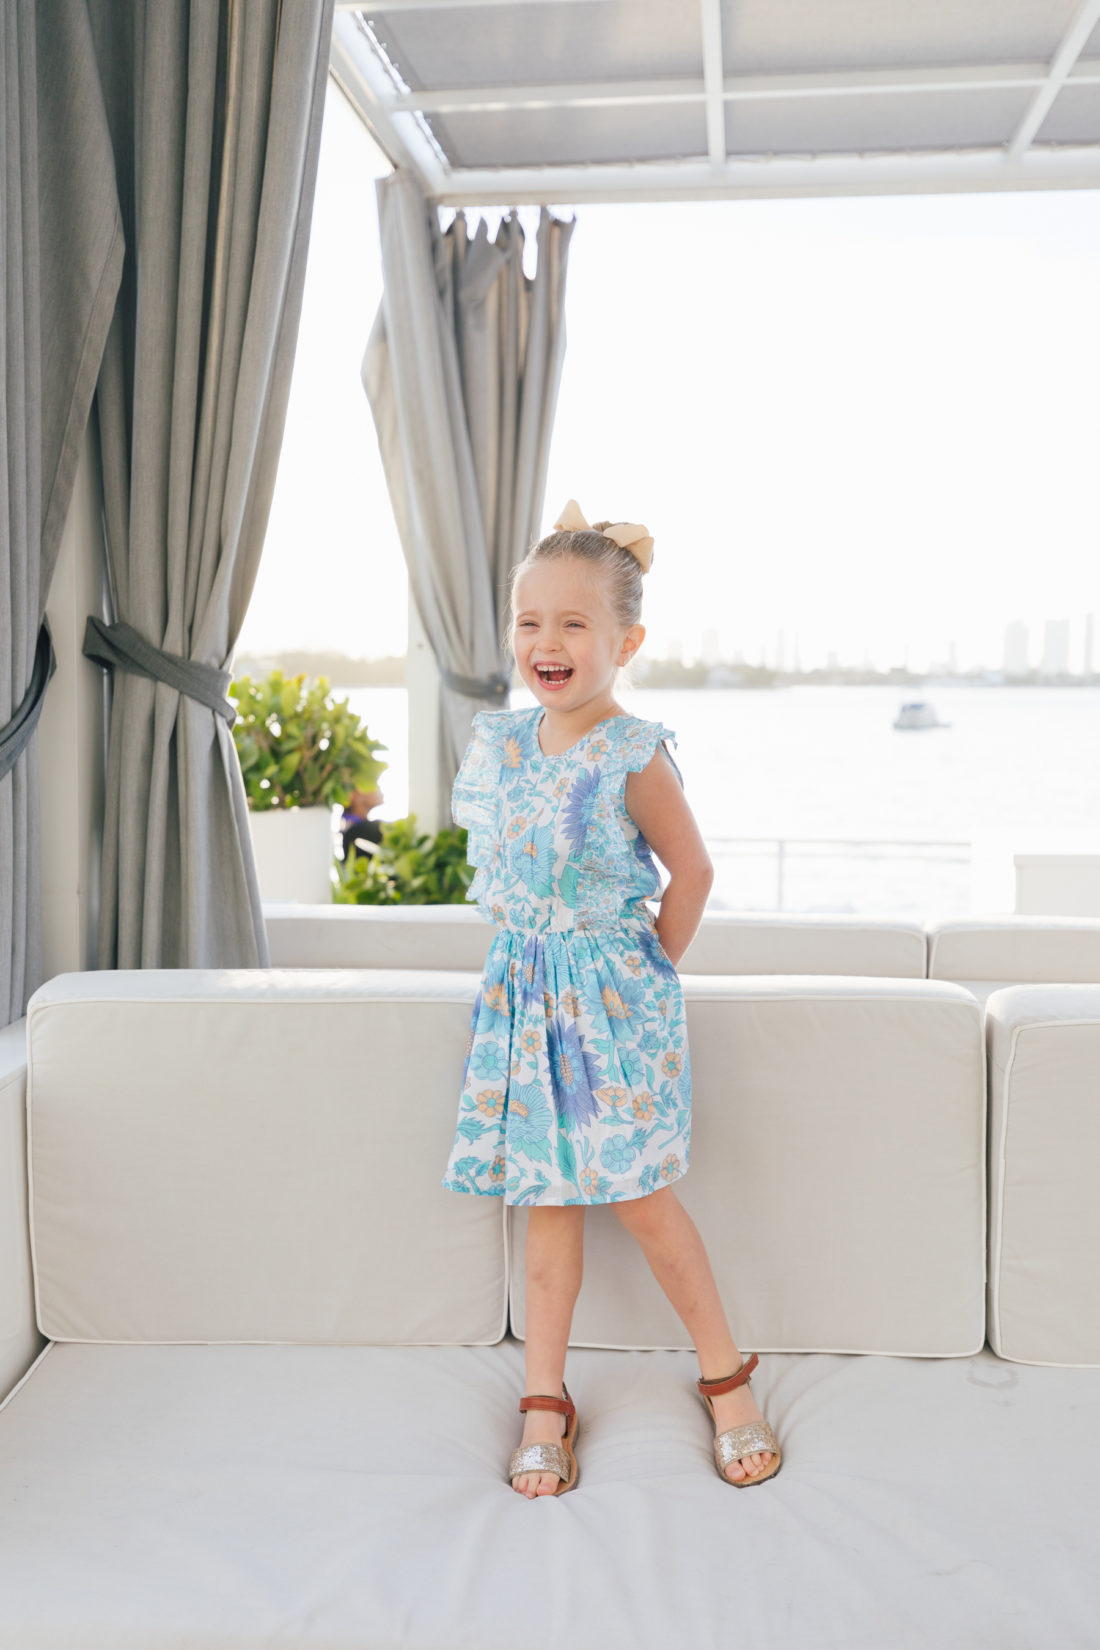 Marlowe Martino laughs while standing in Miami wearing the fantasia dress from the Happily Eva After x Masala Baby capsule collection